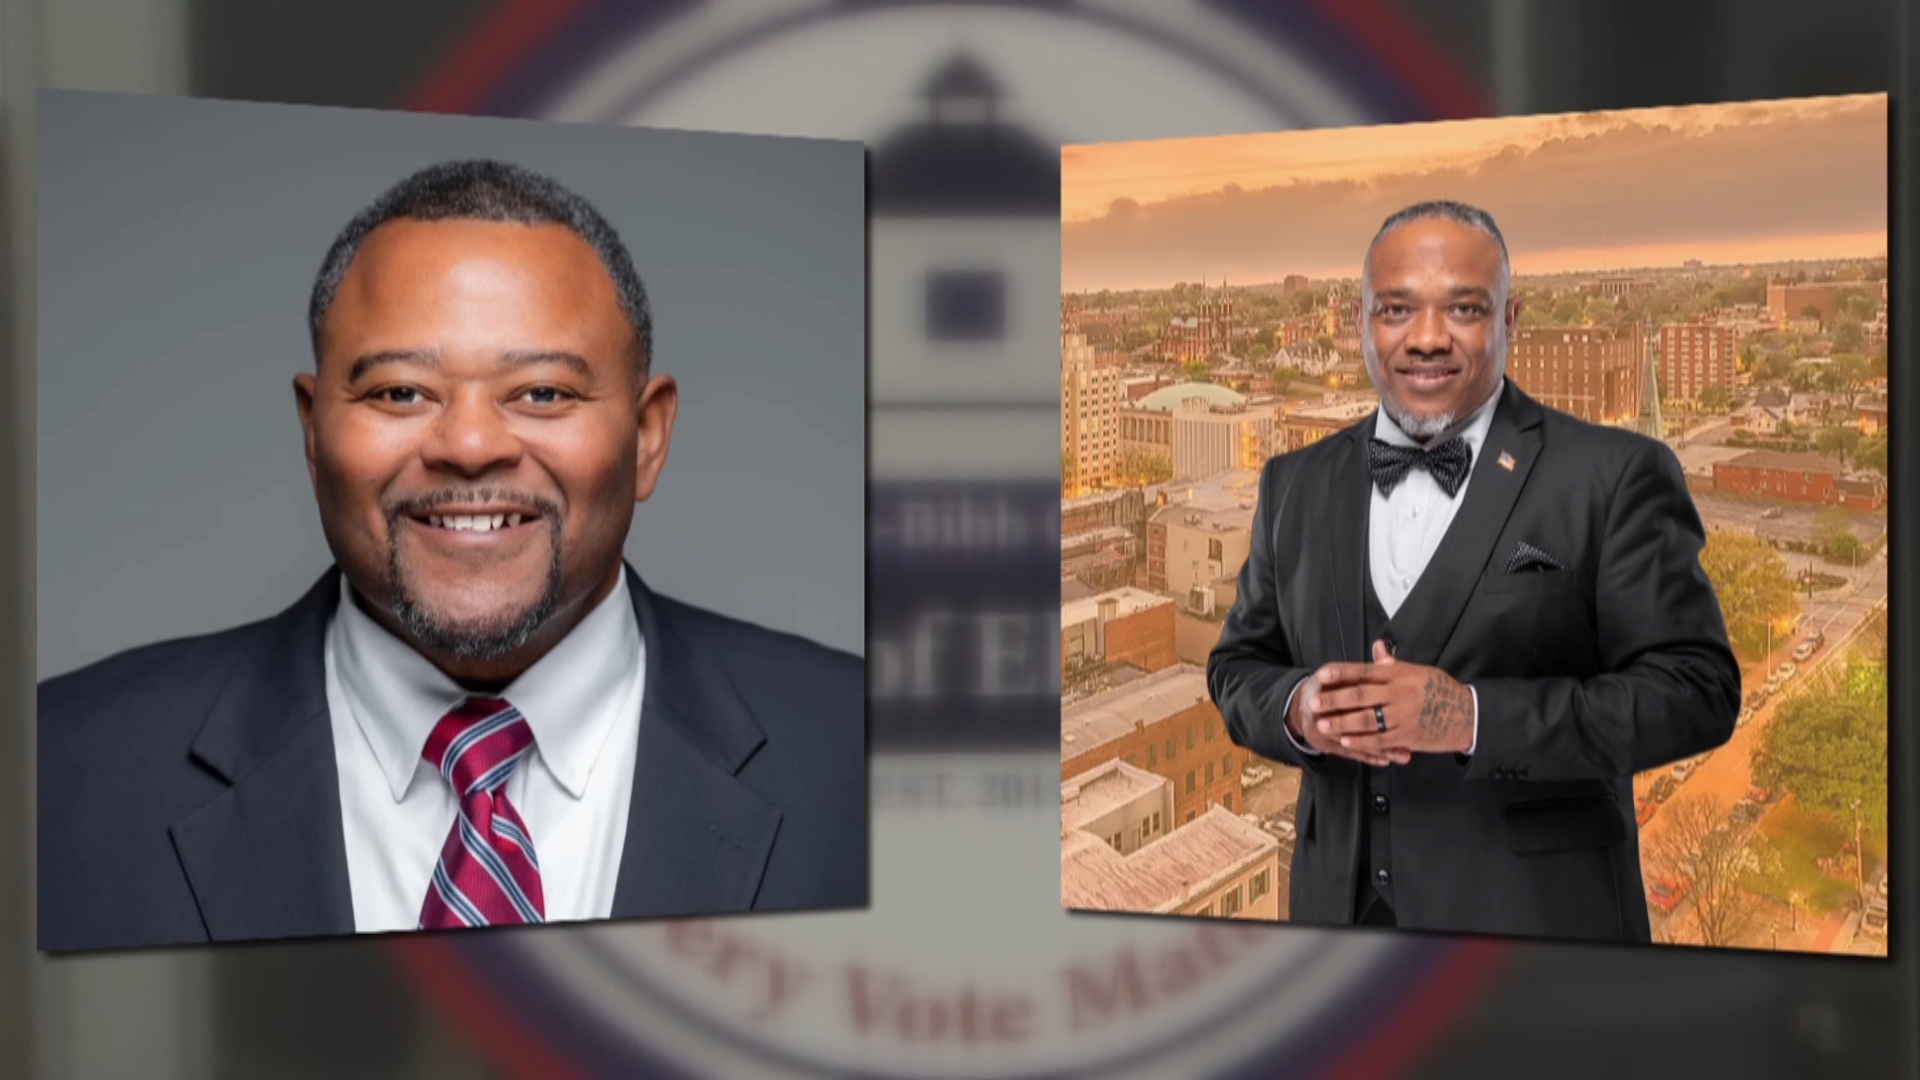 Attorneys for the two candidates are now suing, hoping to reverse the decision of the Macon-Bibb Board of Elections to disqualify them.